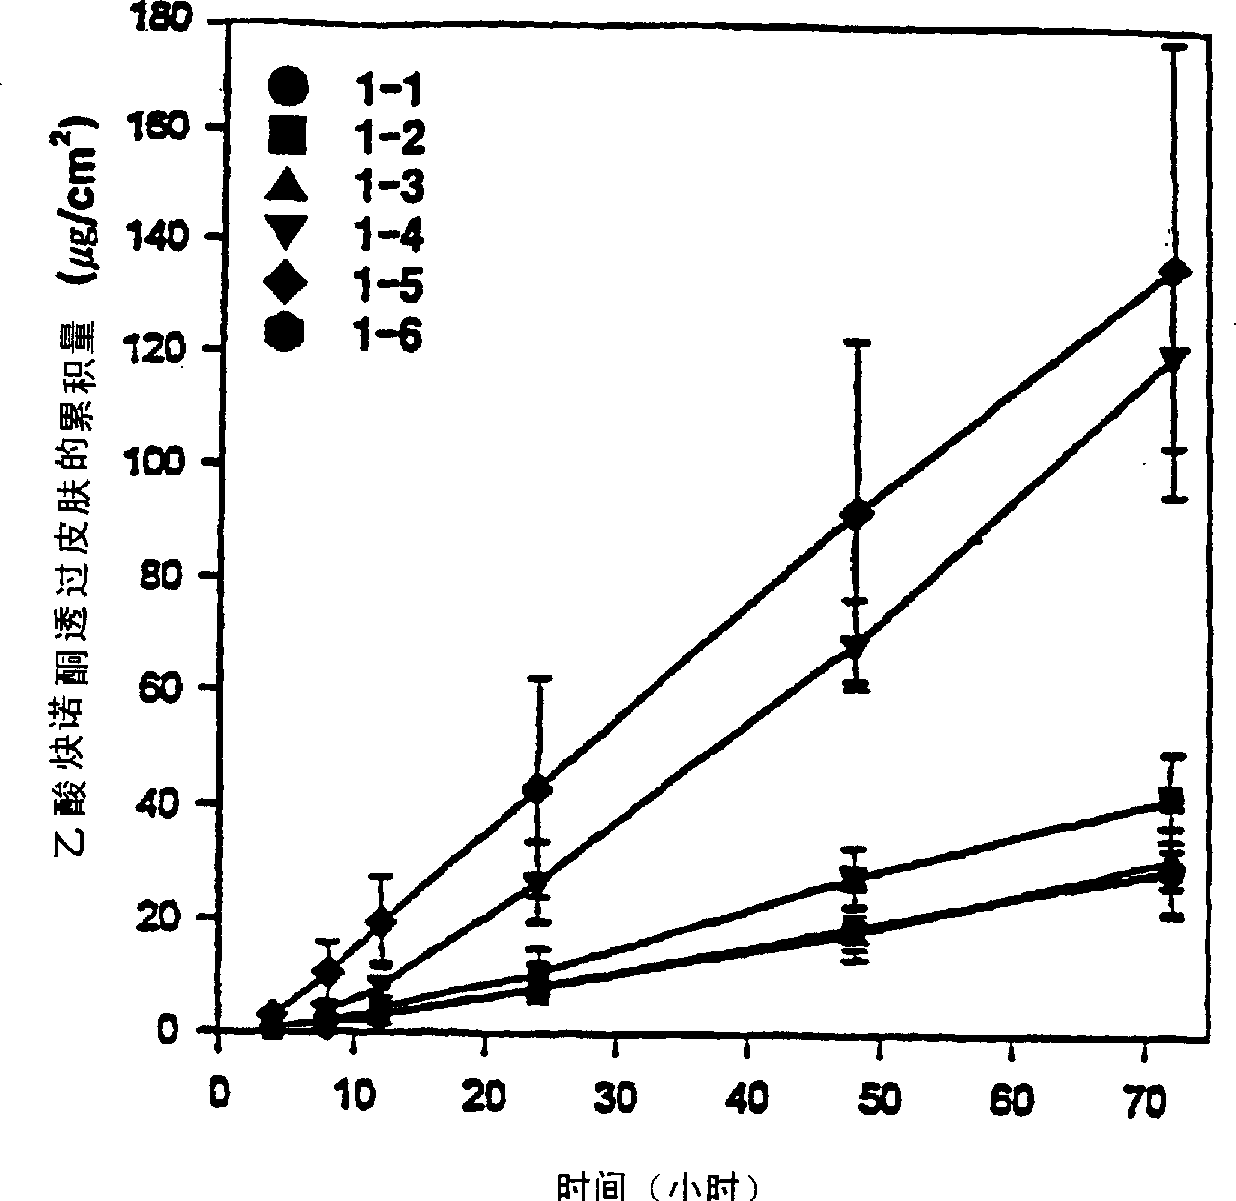 Compositions for transdermal administration of streoid drugs